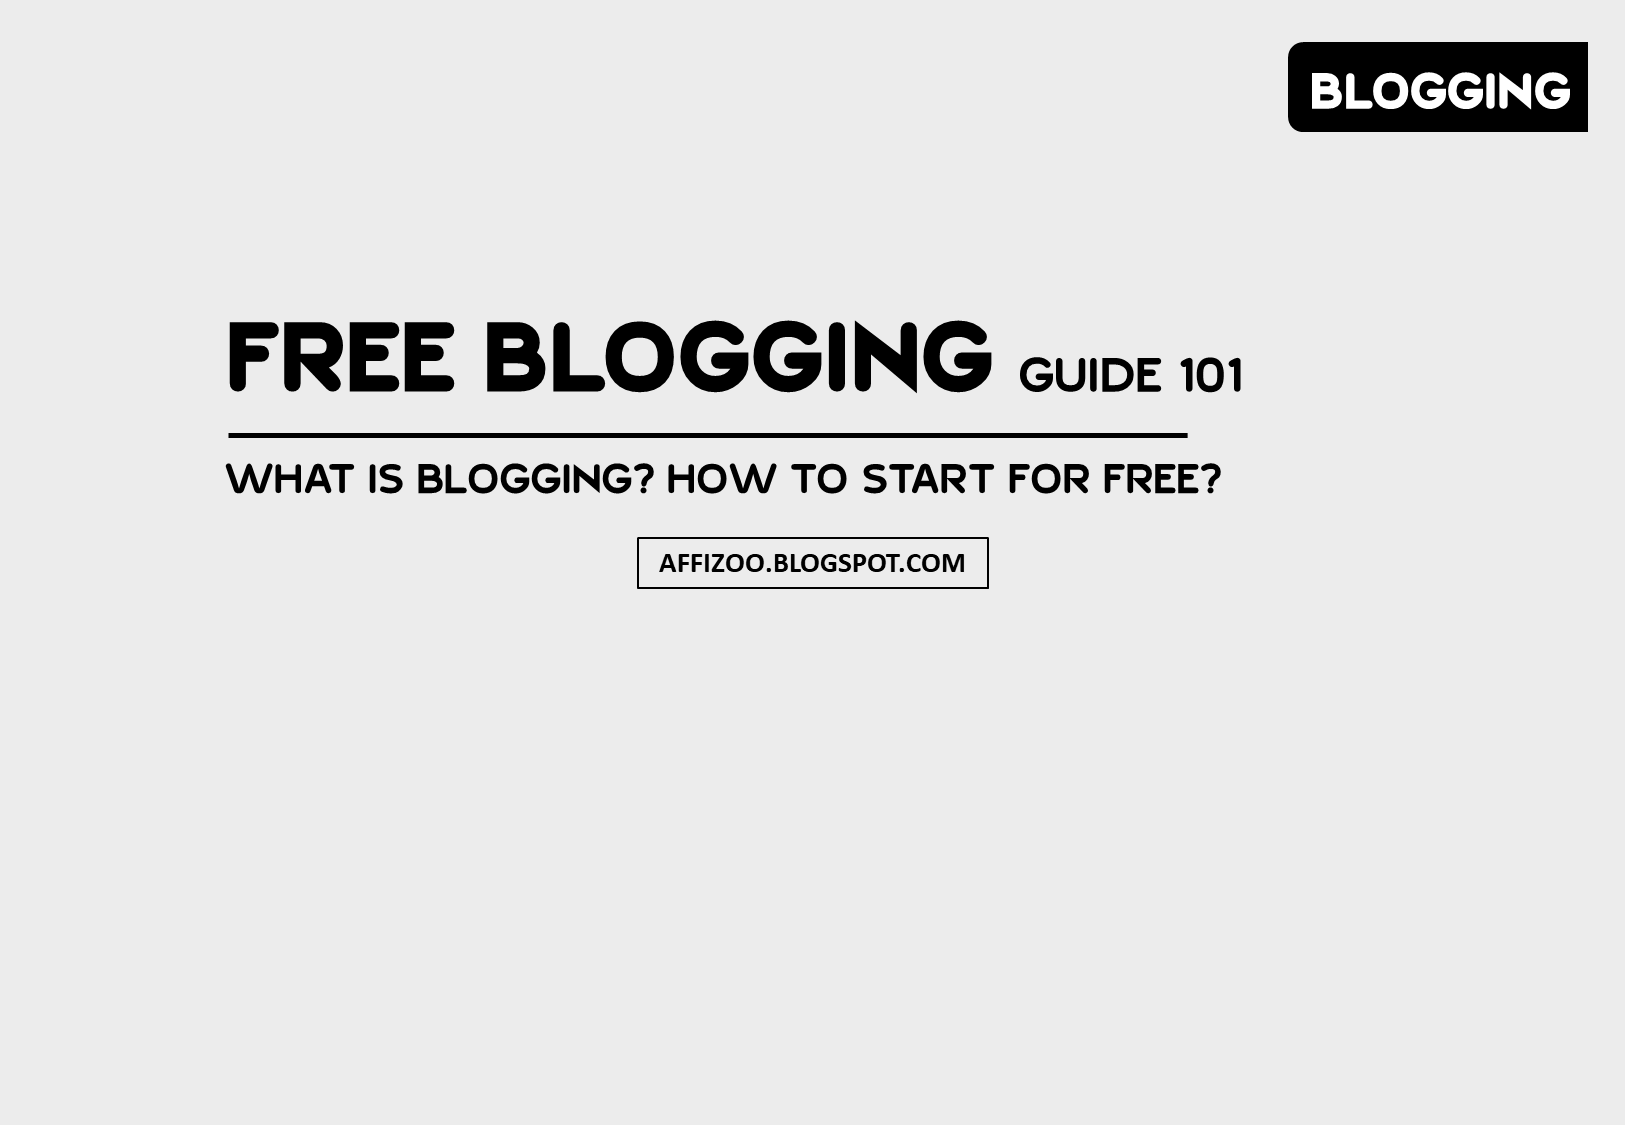 What is Blogging? How to start for free?